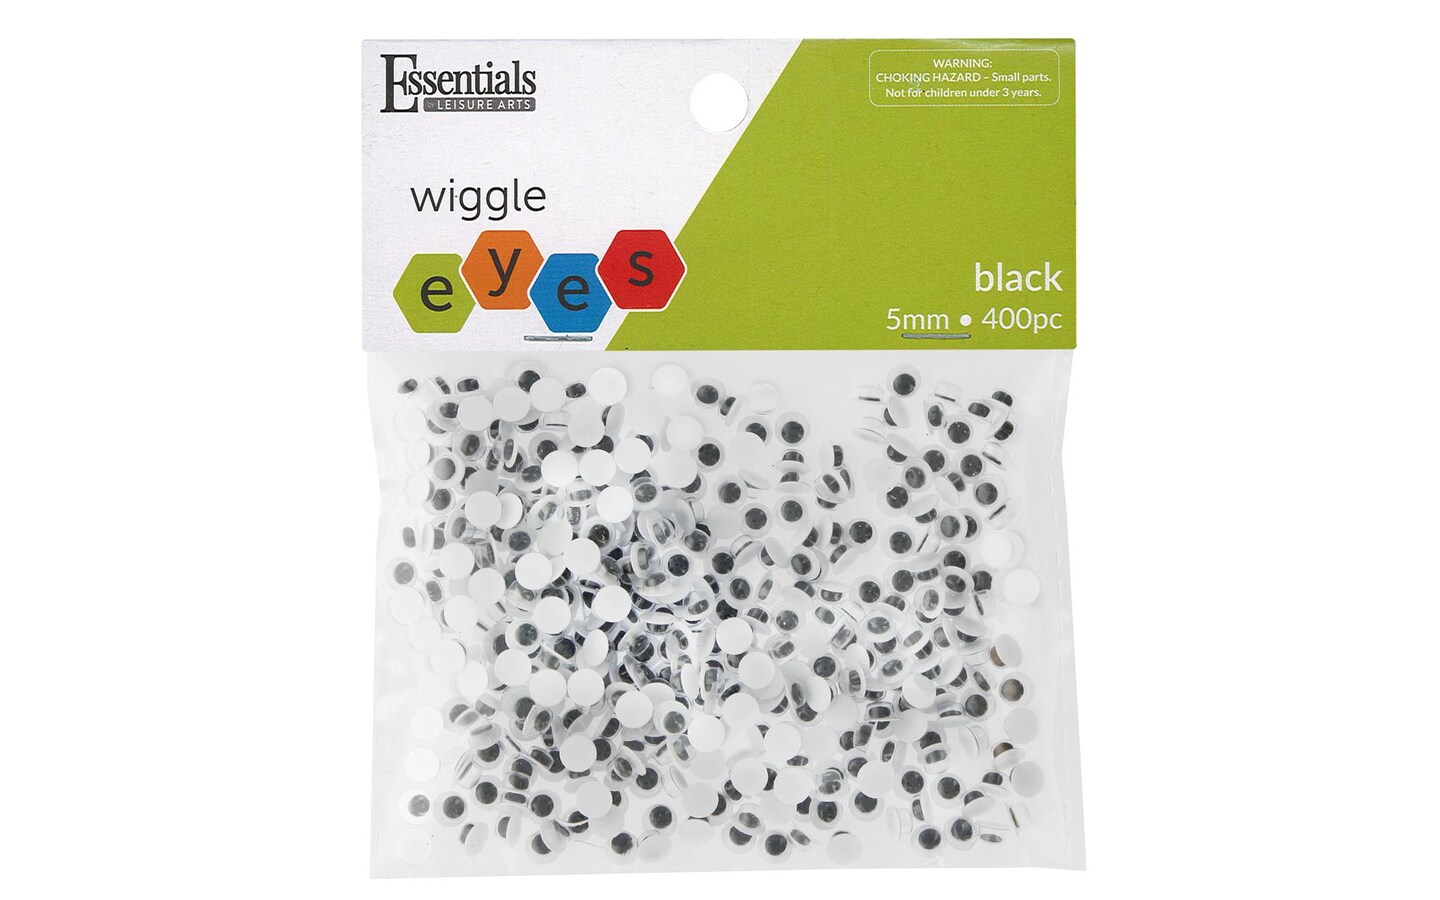 Essentials by Leisure Arts Eyes Paste On Moveable 5mm Black 400pc